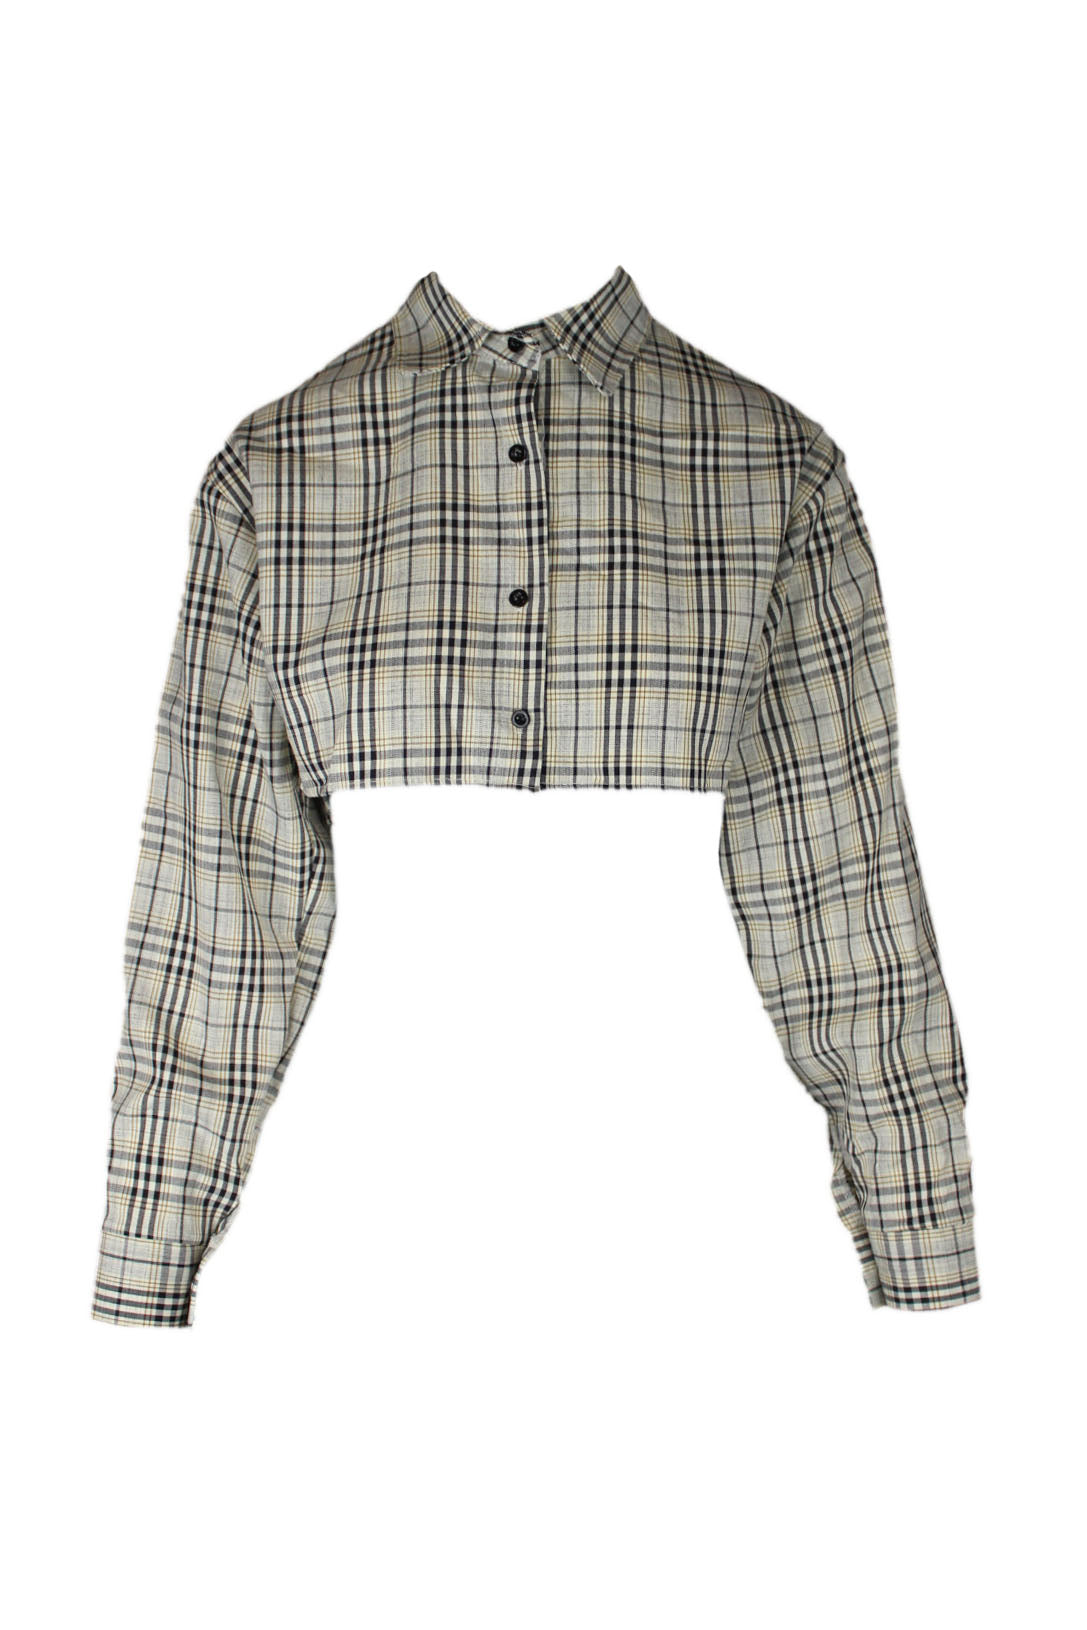 front of unlabeled beige long sleeve crop top. features spread collar, plaid pattern throughout, button at cuffs, and button closure at front. 